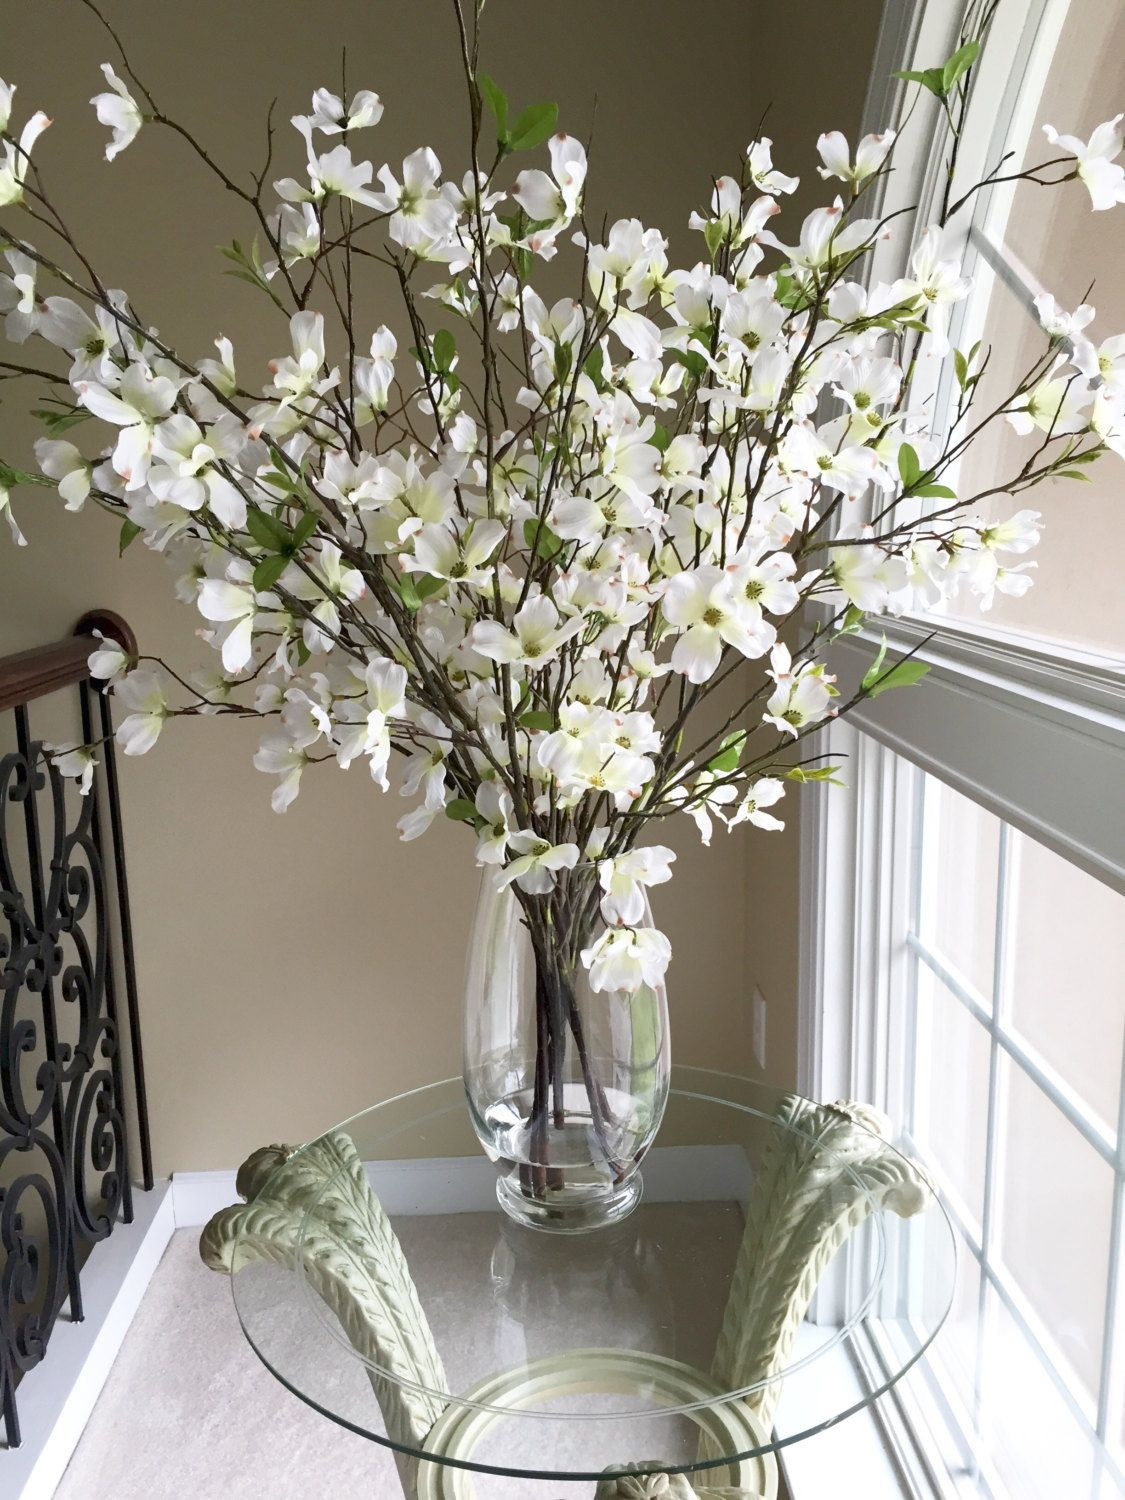 27 Recommended Large Square Glass Vase 2024 free download large square glass vase of beautiful dogwood branches in large glass vase by theenchantedorchid in beautiful dogwood branches in large glass vase by theenchantedorchid on etsy